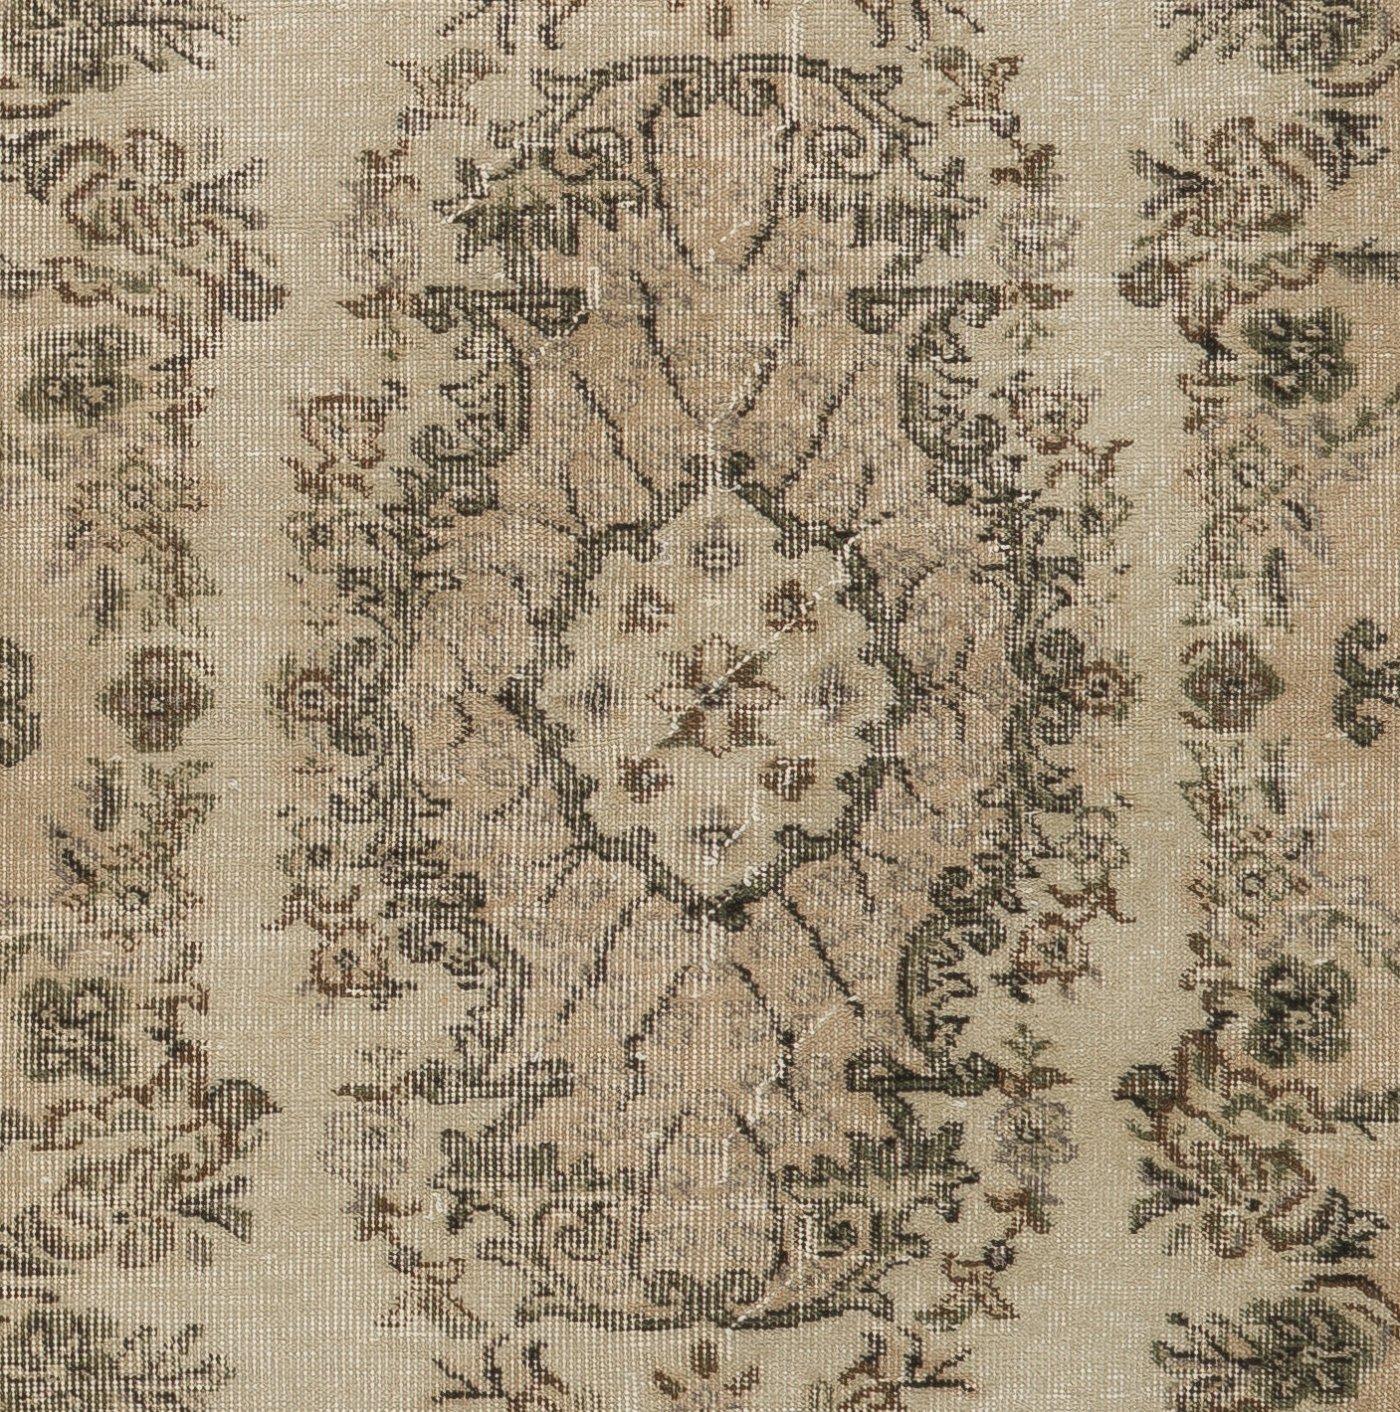 Hand-Knotted 4x7 Ft Handmade Vintage Turkish Accent Rug in Beige & Brown. Faded Wool Carpet For Sale